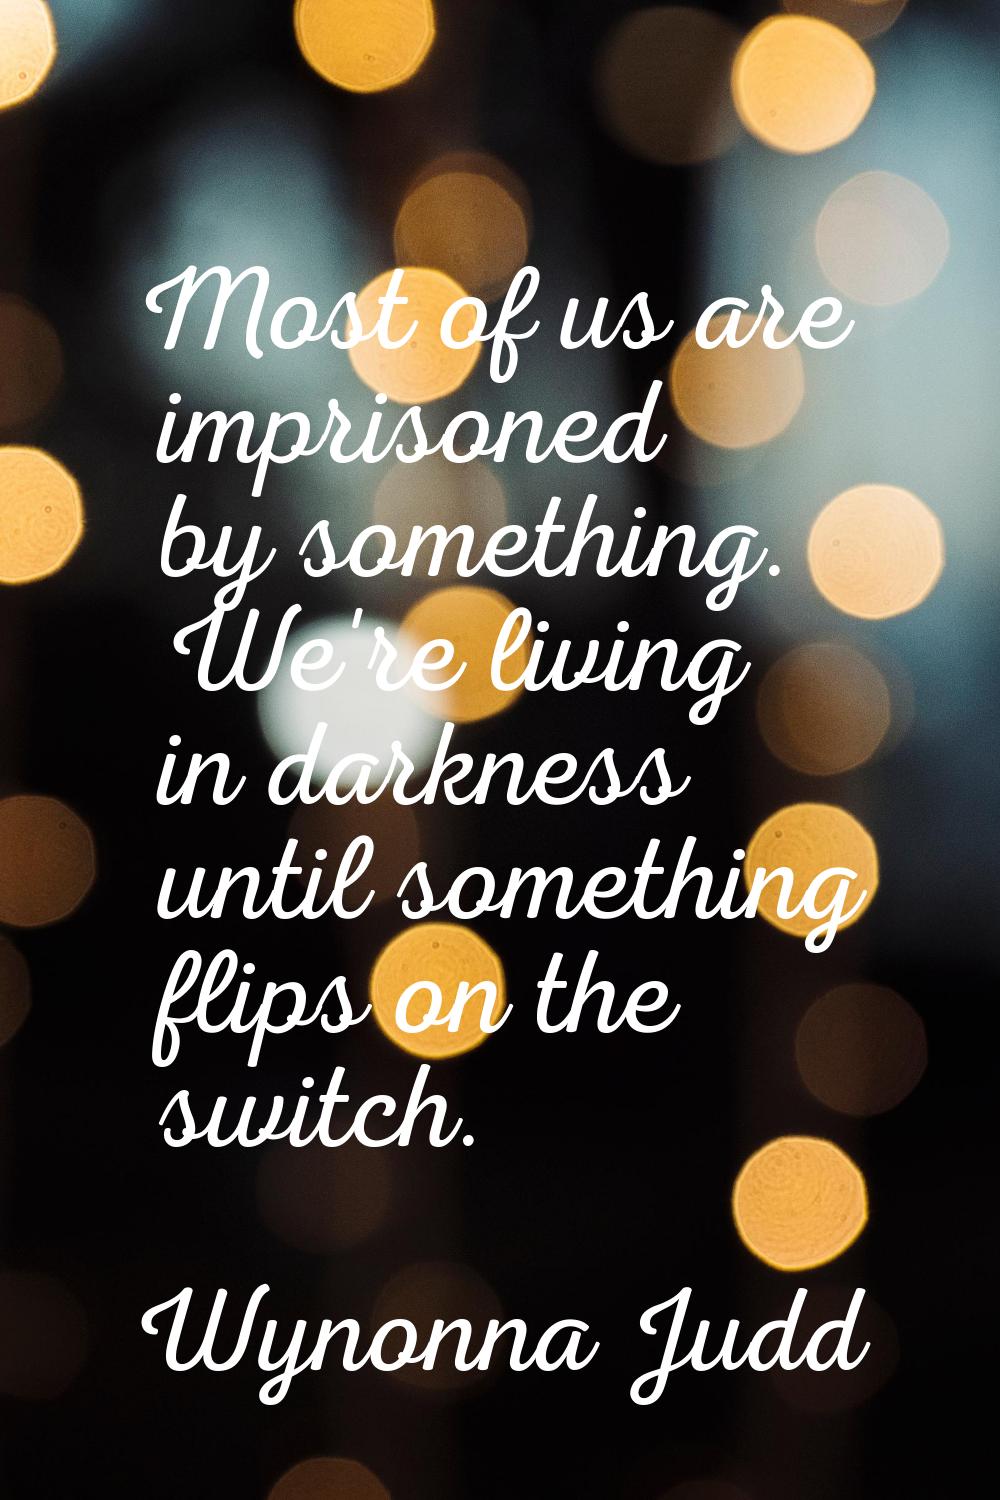 Most of us are imprisoned by something. We're living in darkness until something flips on the switc